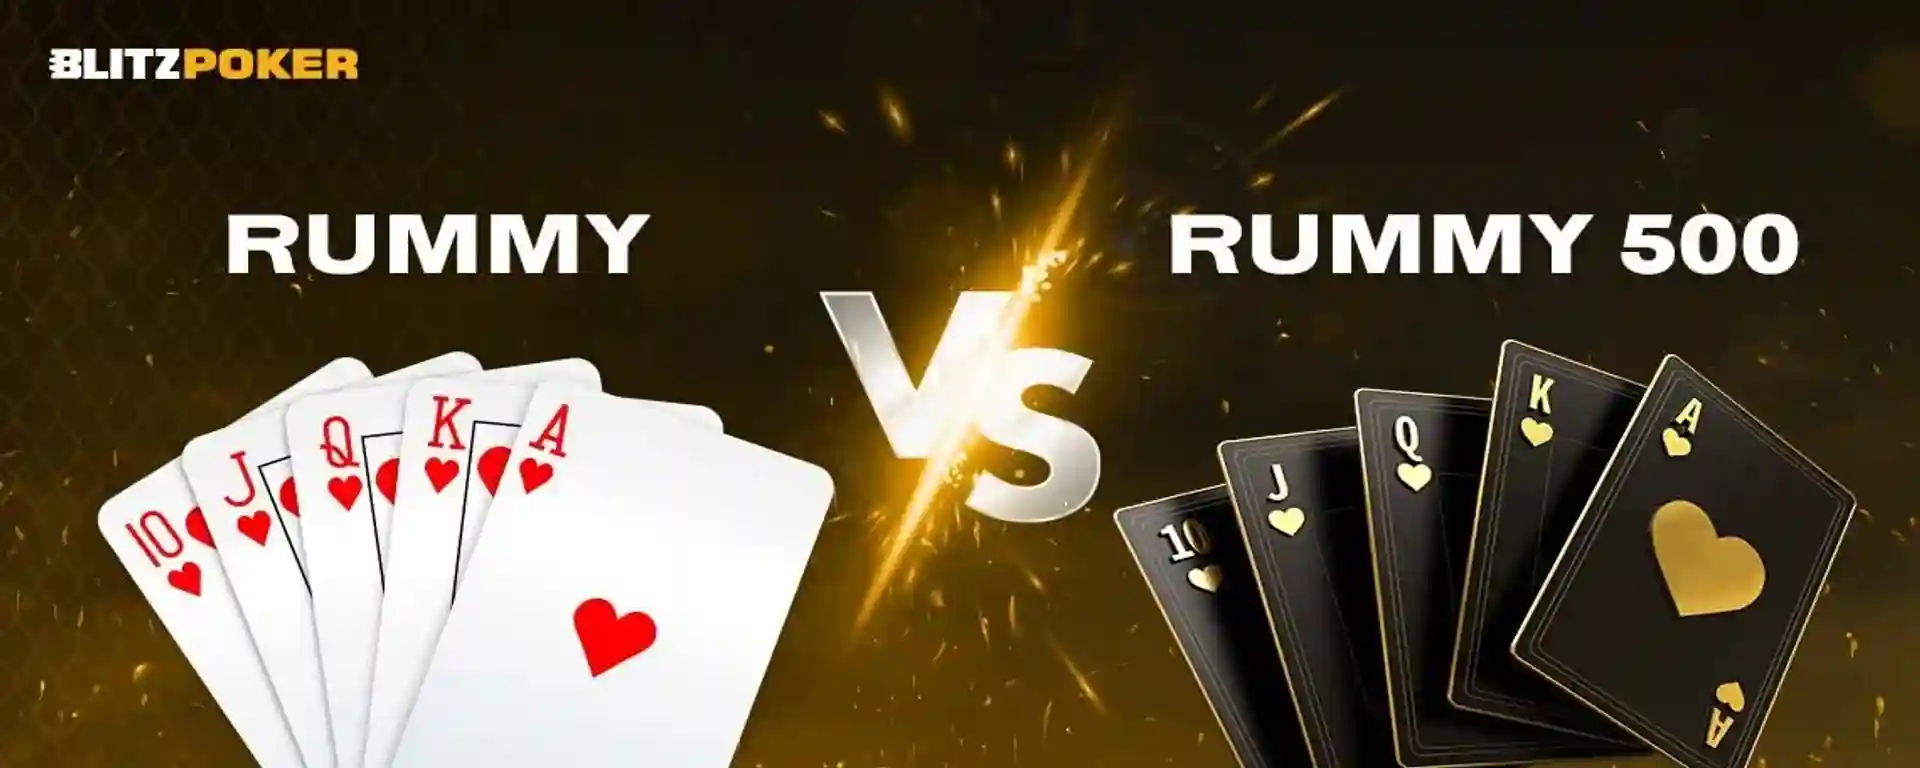 Differences Between Rummy and Rummy 500